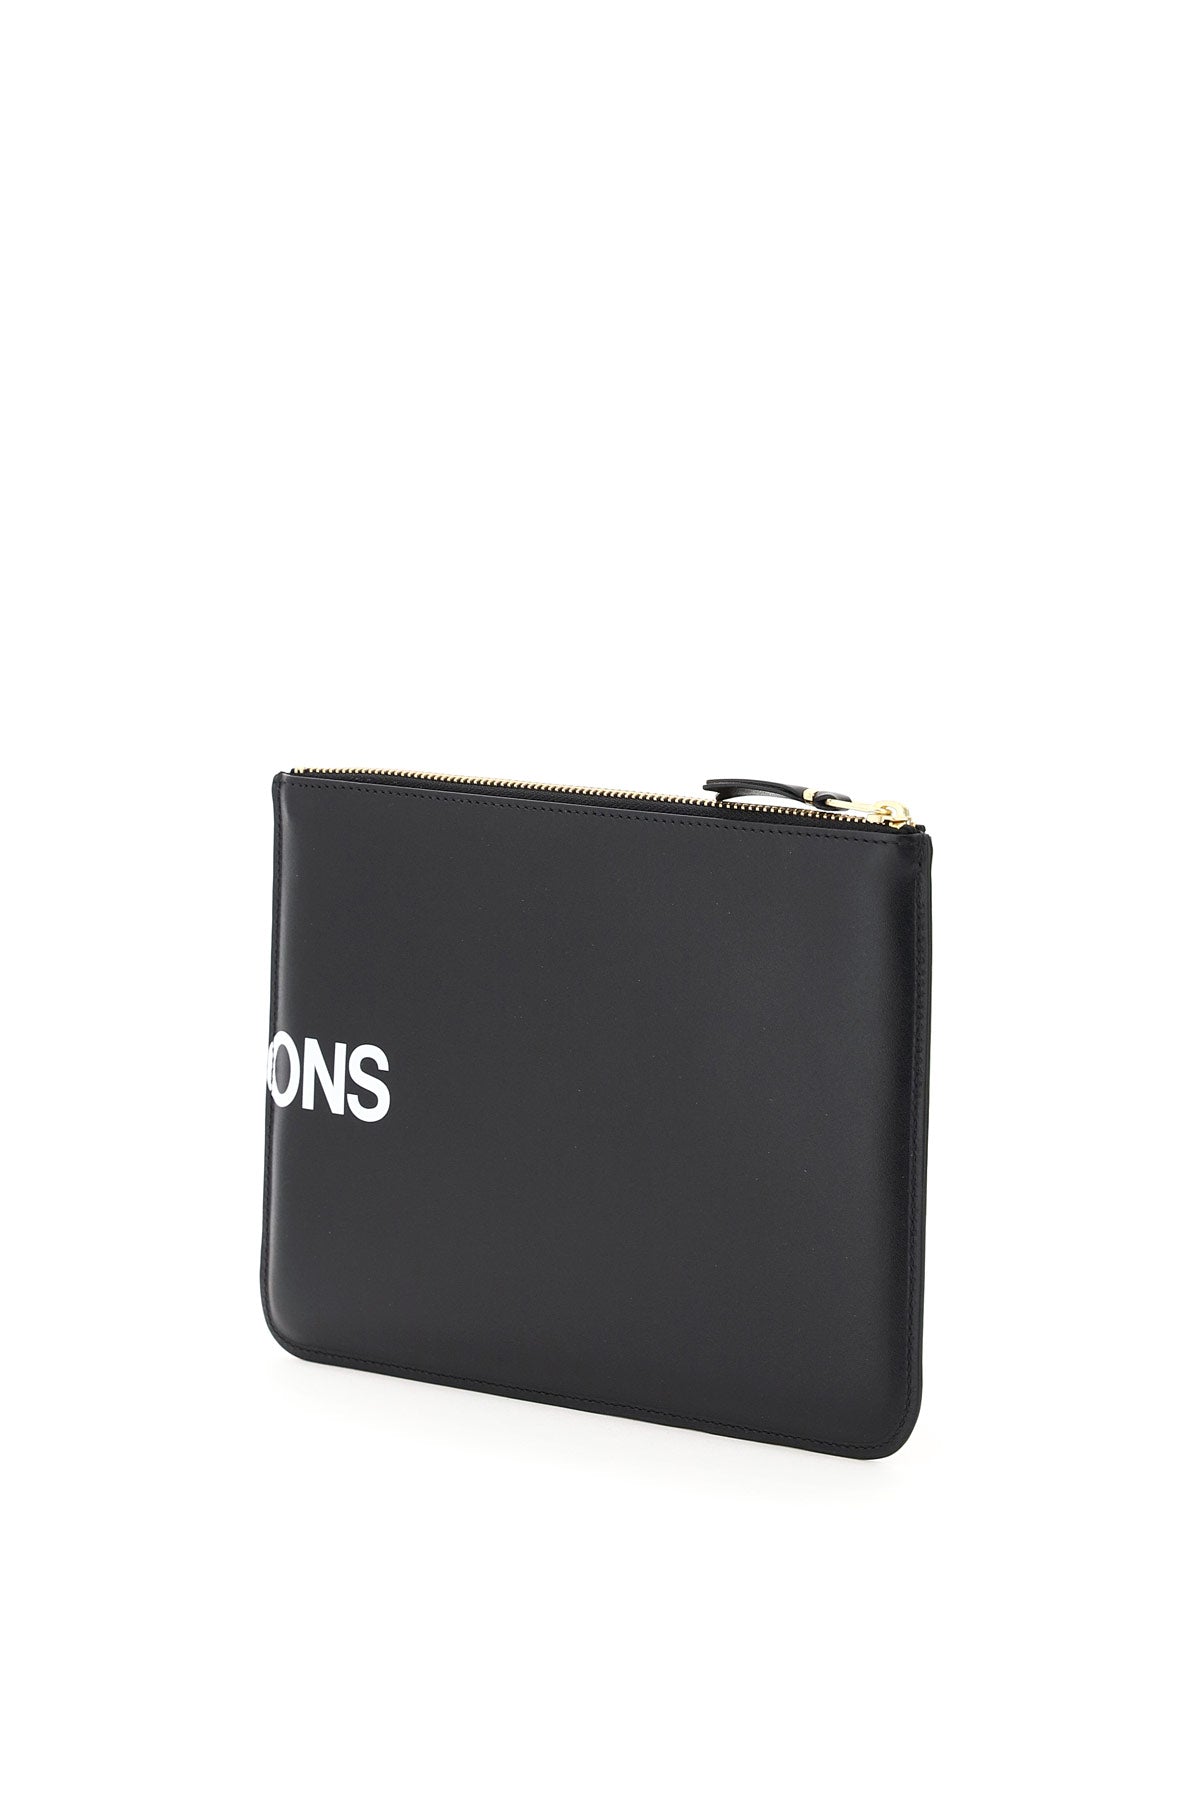 Comme des garcons wallet leather pouch with logo-1